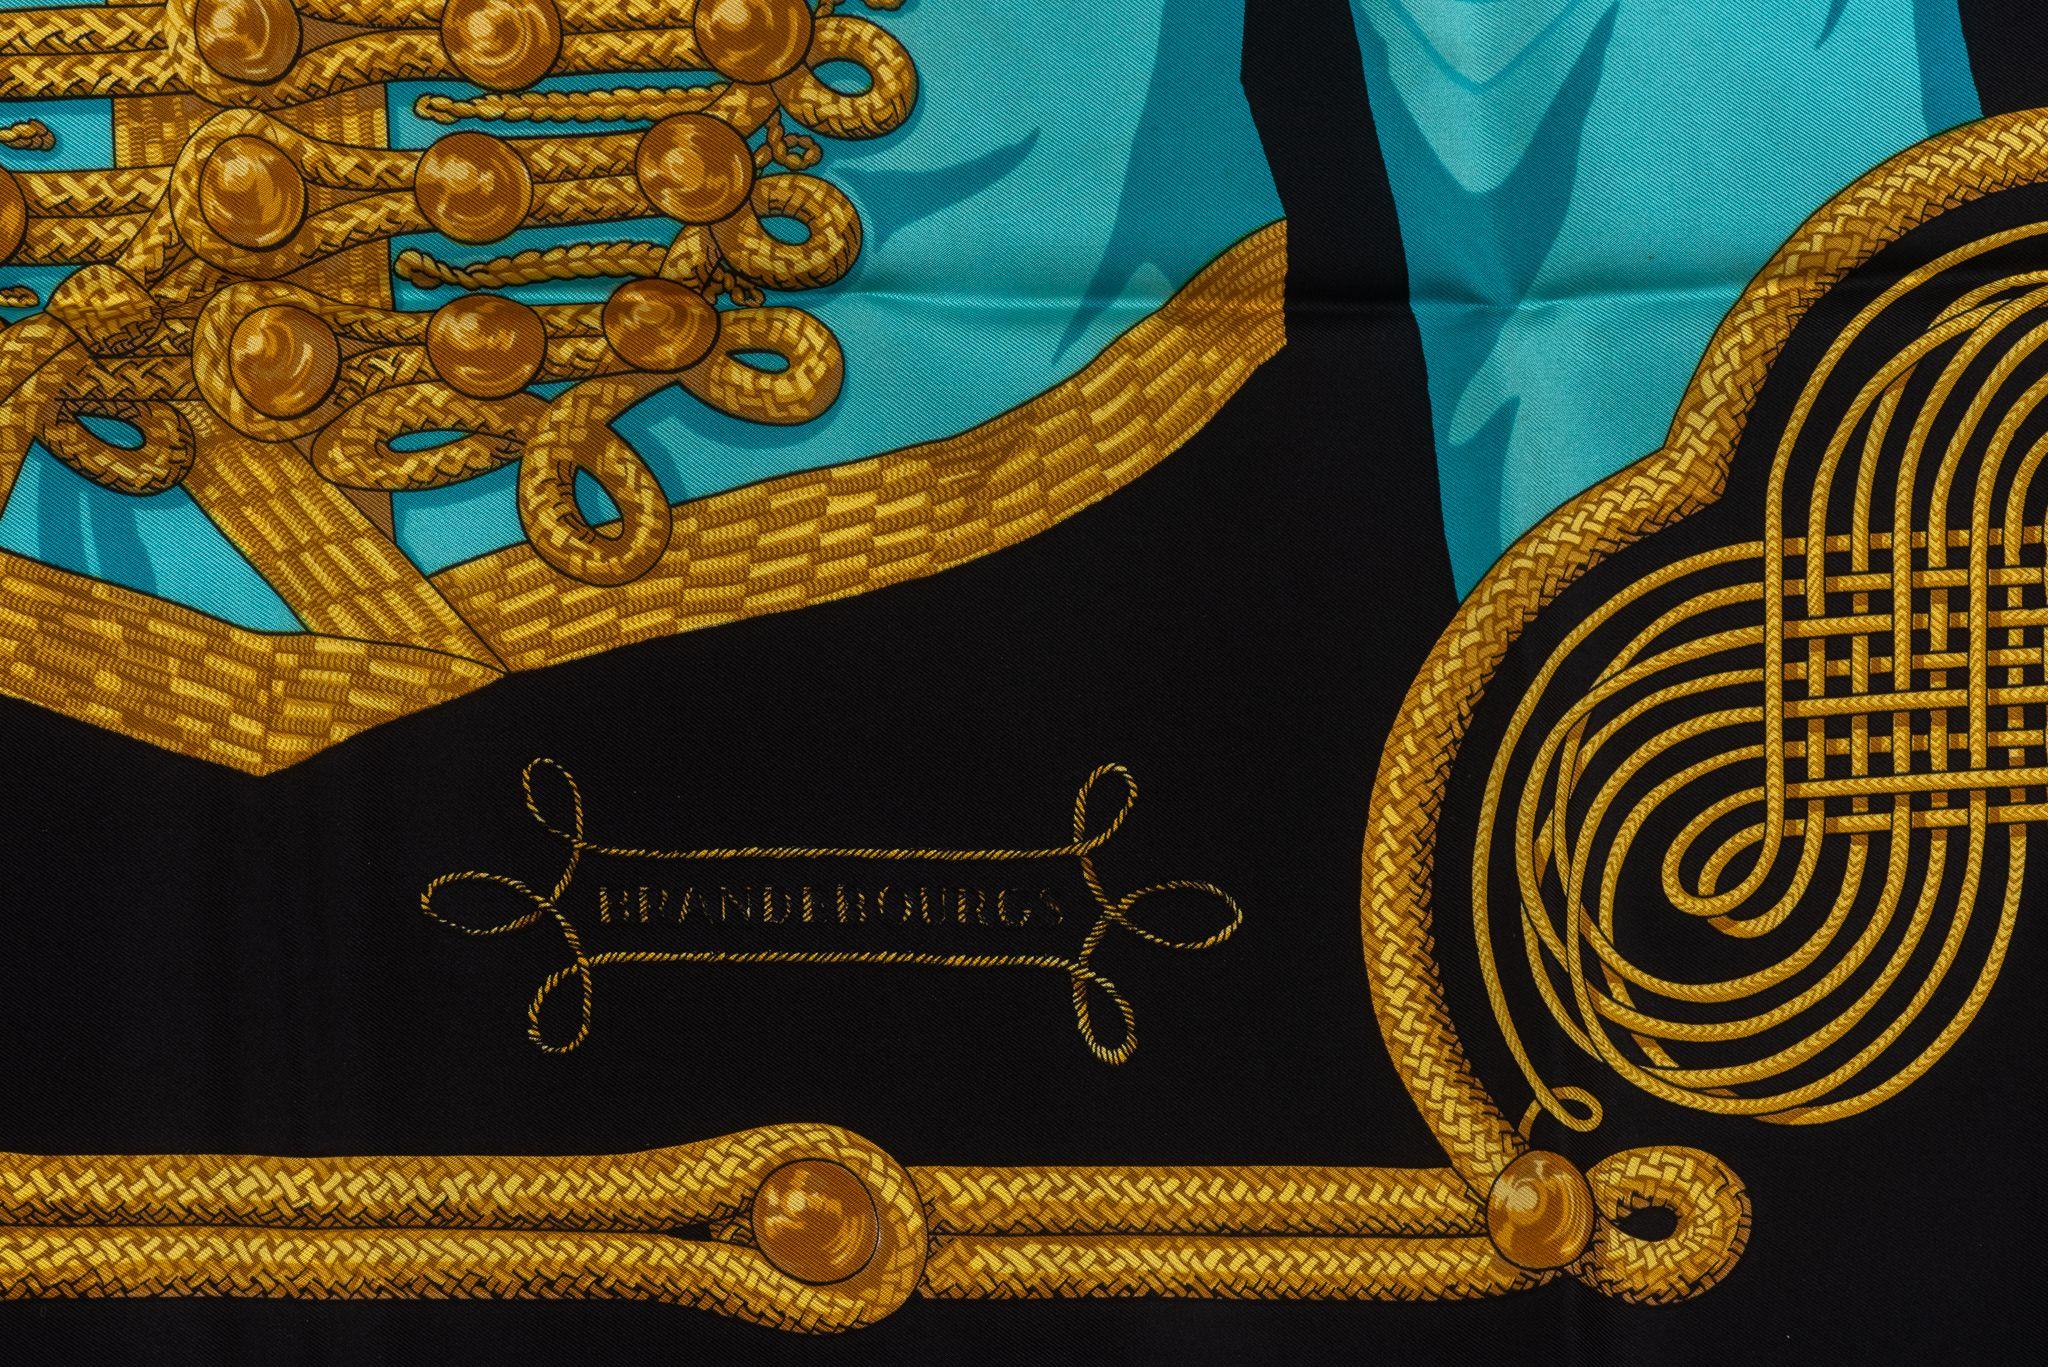 Hermes Rare Black Brandebourg Silk Scarf In Excellent Condition For Sale In West Hollywood, CA